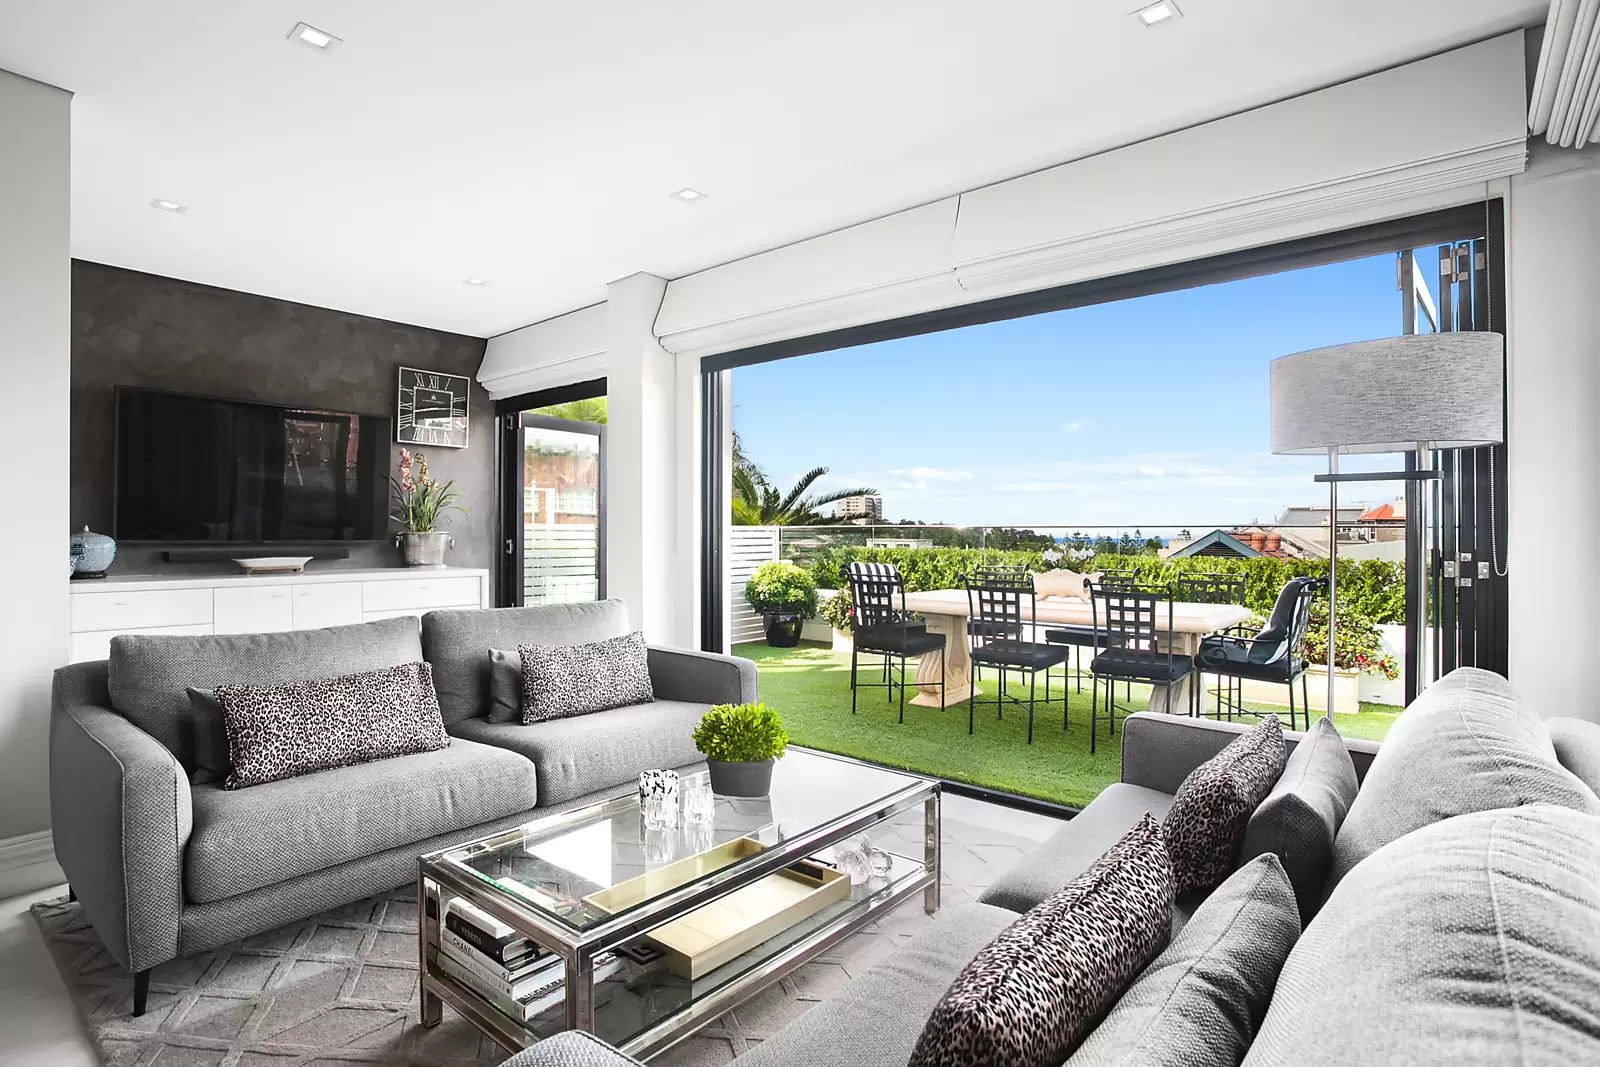 Photo #1: 1/180-186 Coogee Bay Road, Coogee - Sold by Sydney Sotheby's International Realty